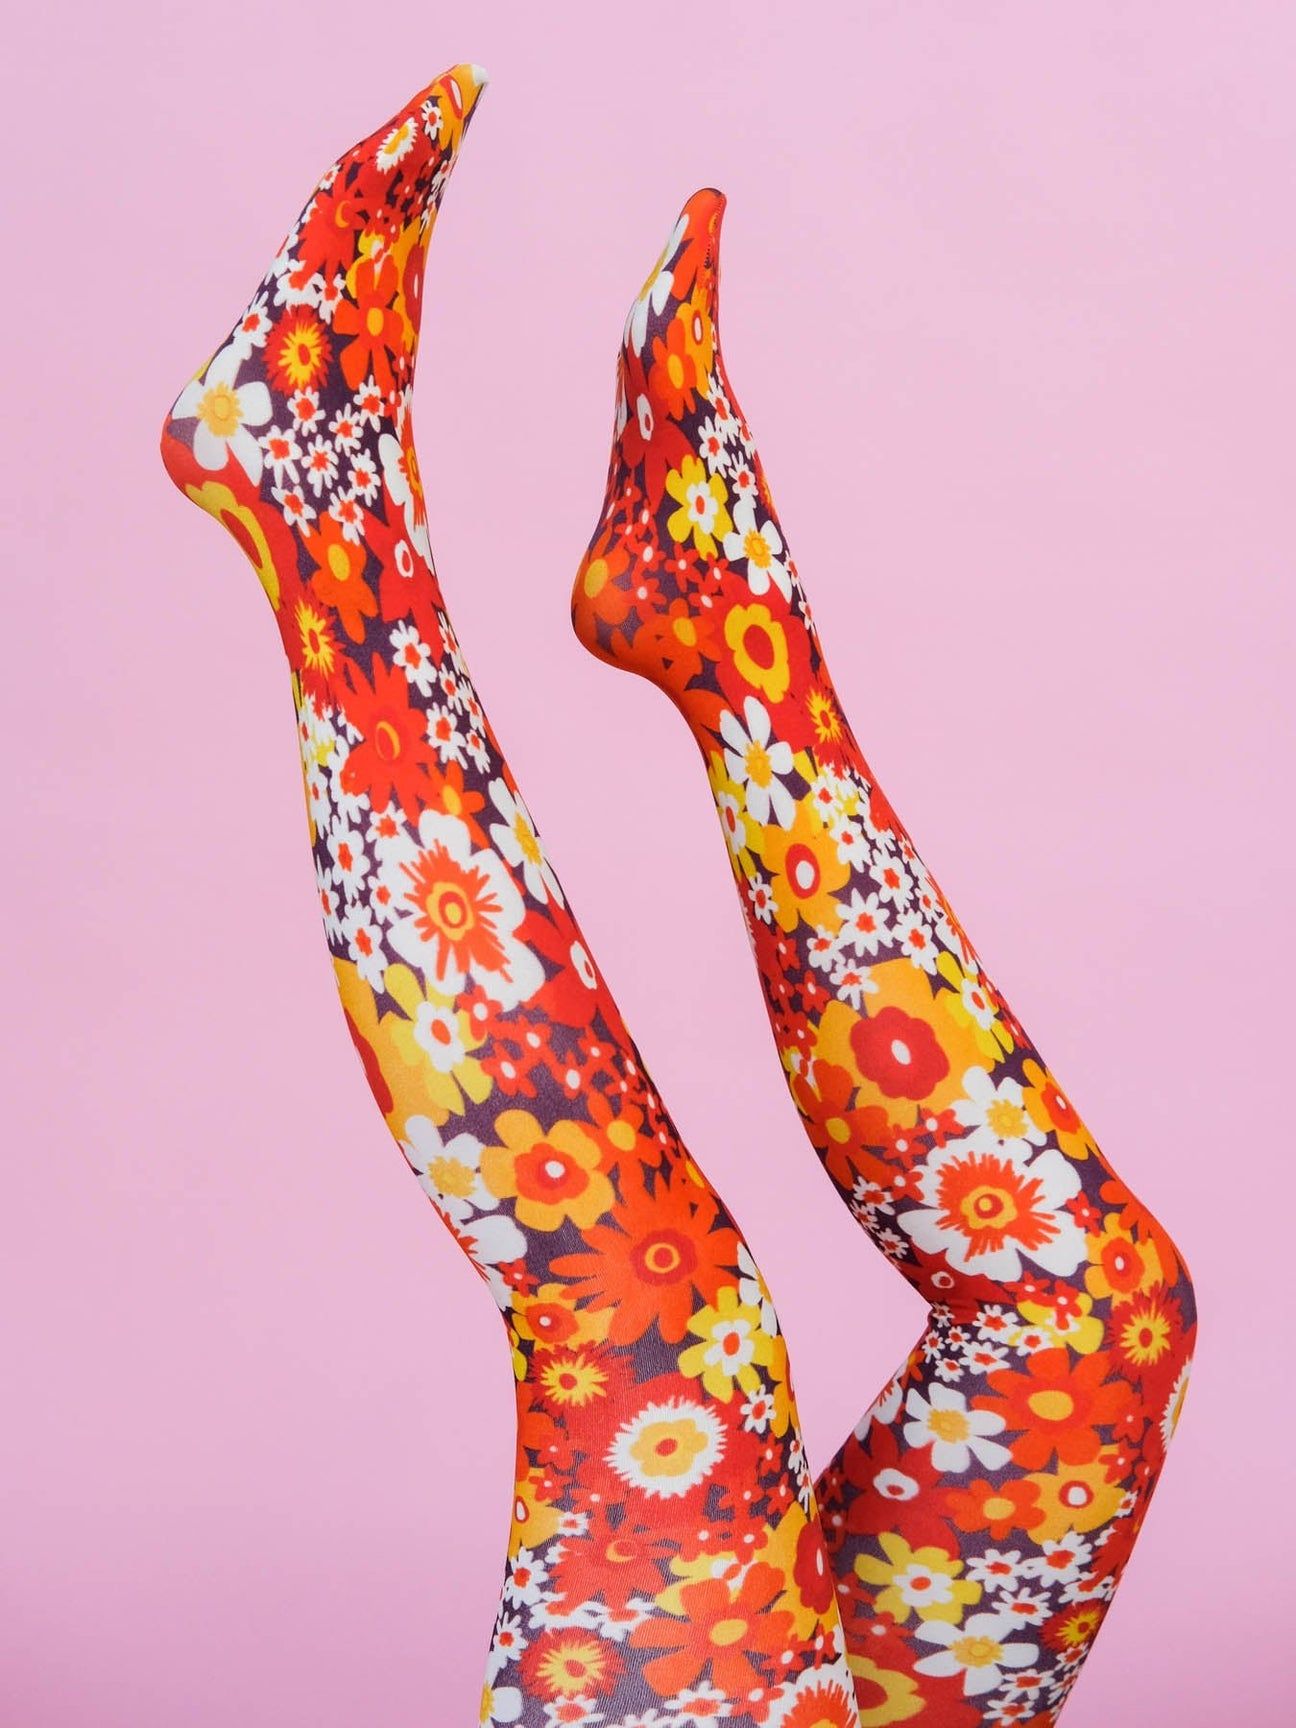 Patterned Tights To Make You Sensuous